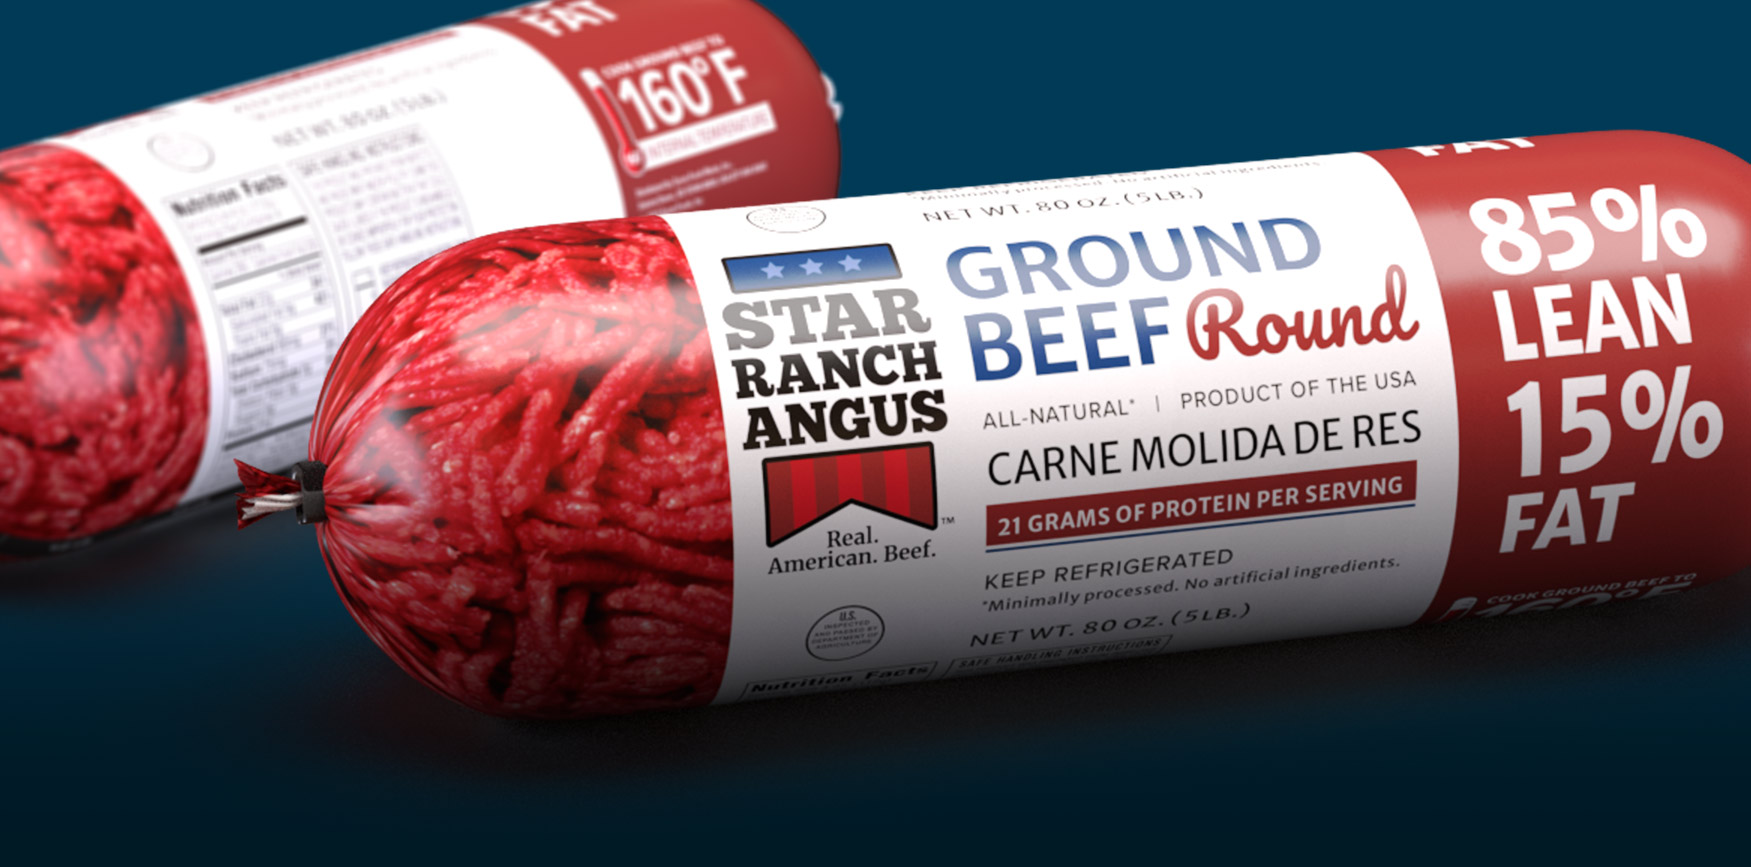 Star Ranch Angus chub ground beef packaging